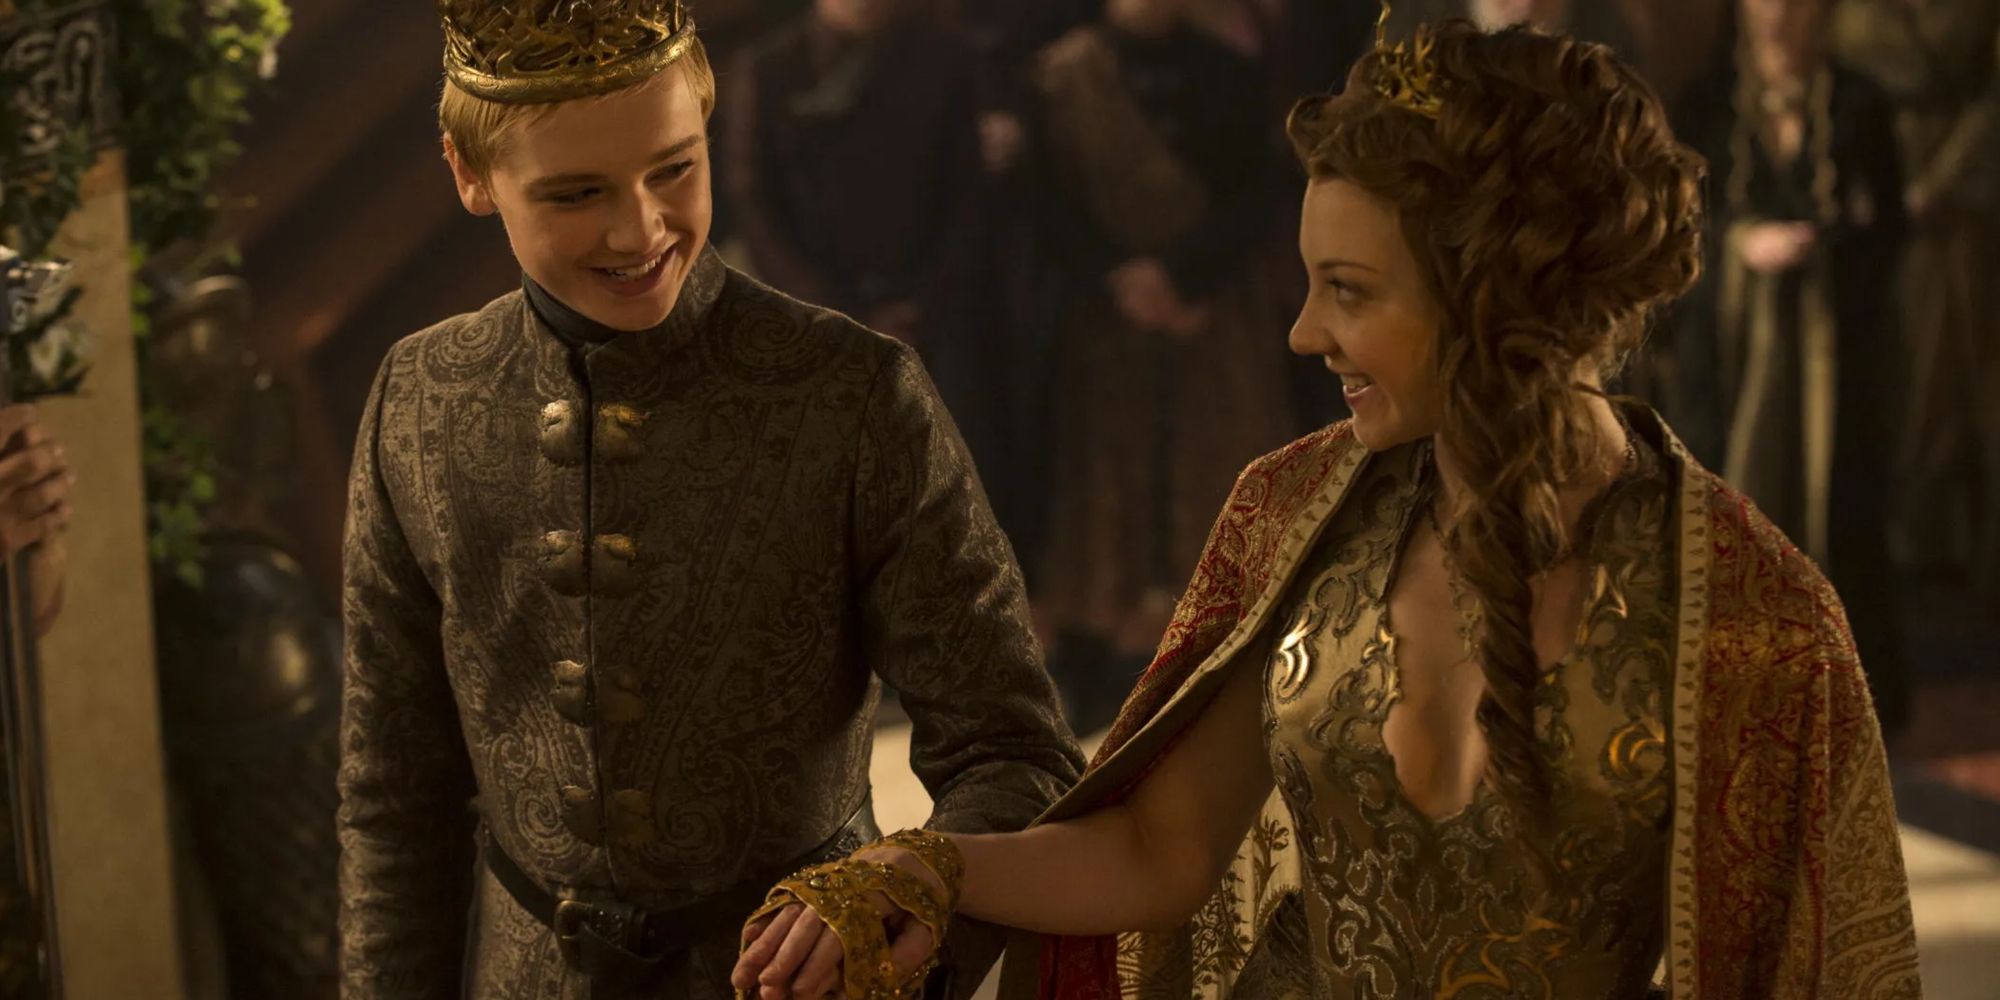 Tommen and Maergery